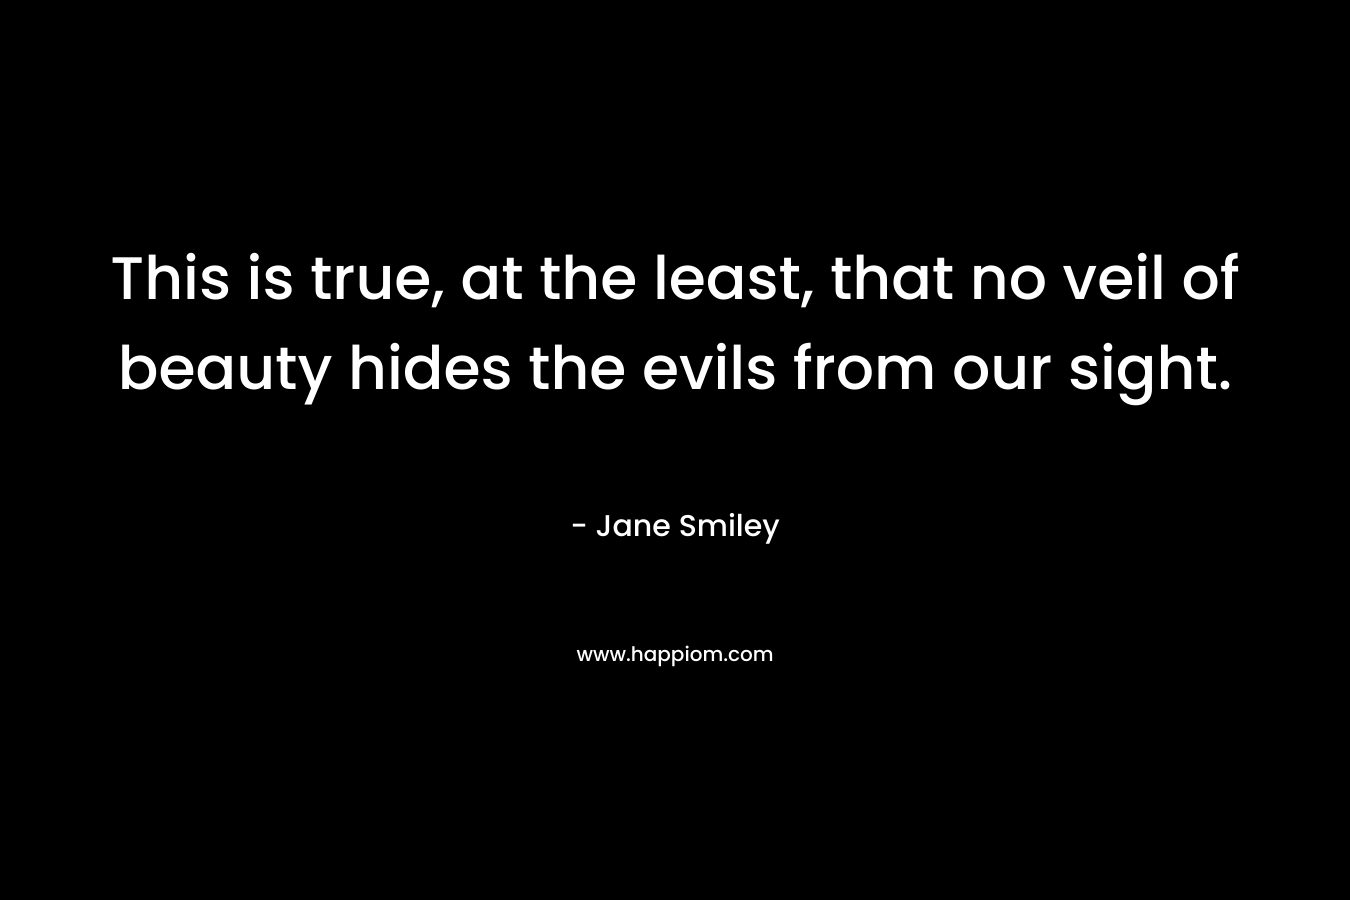 This is true, at the least, that no veil of beauty hides the evils from our sight.